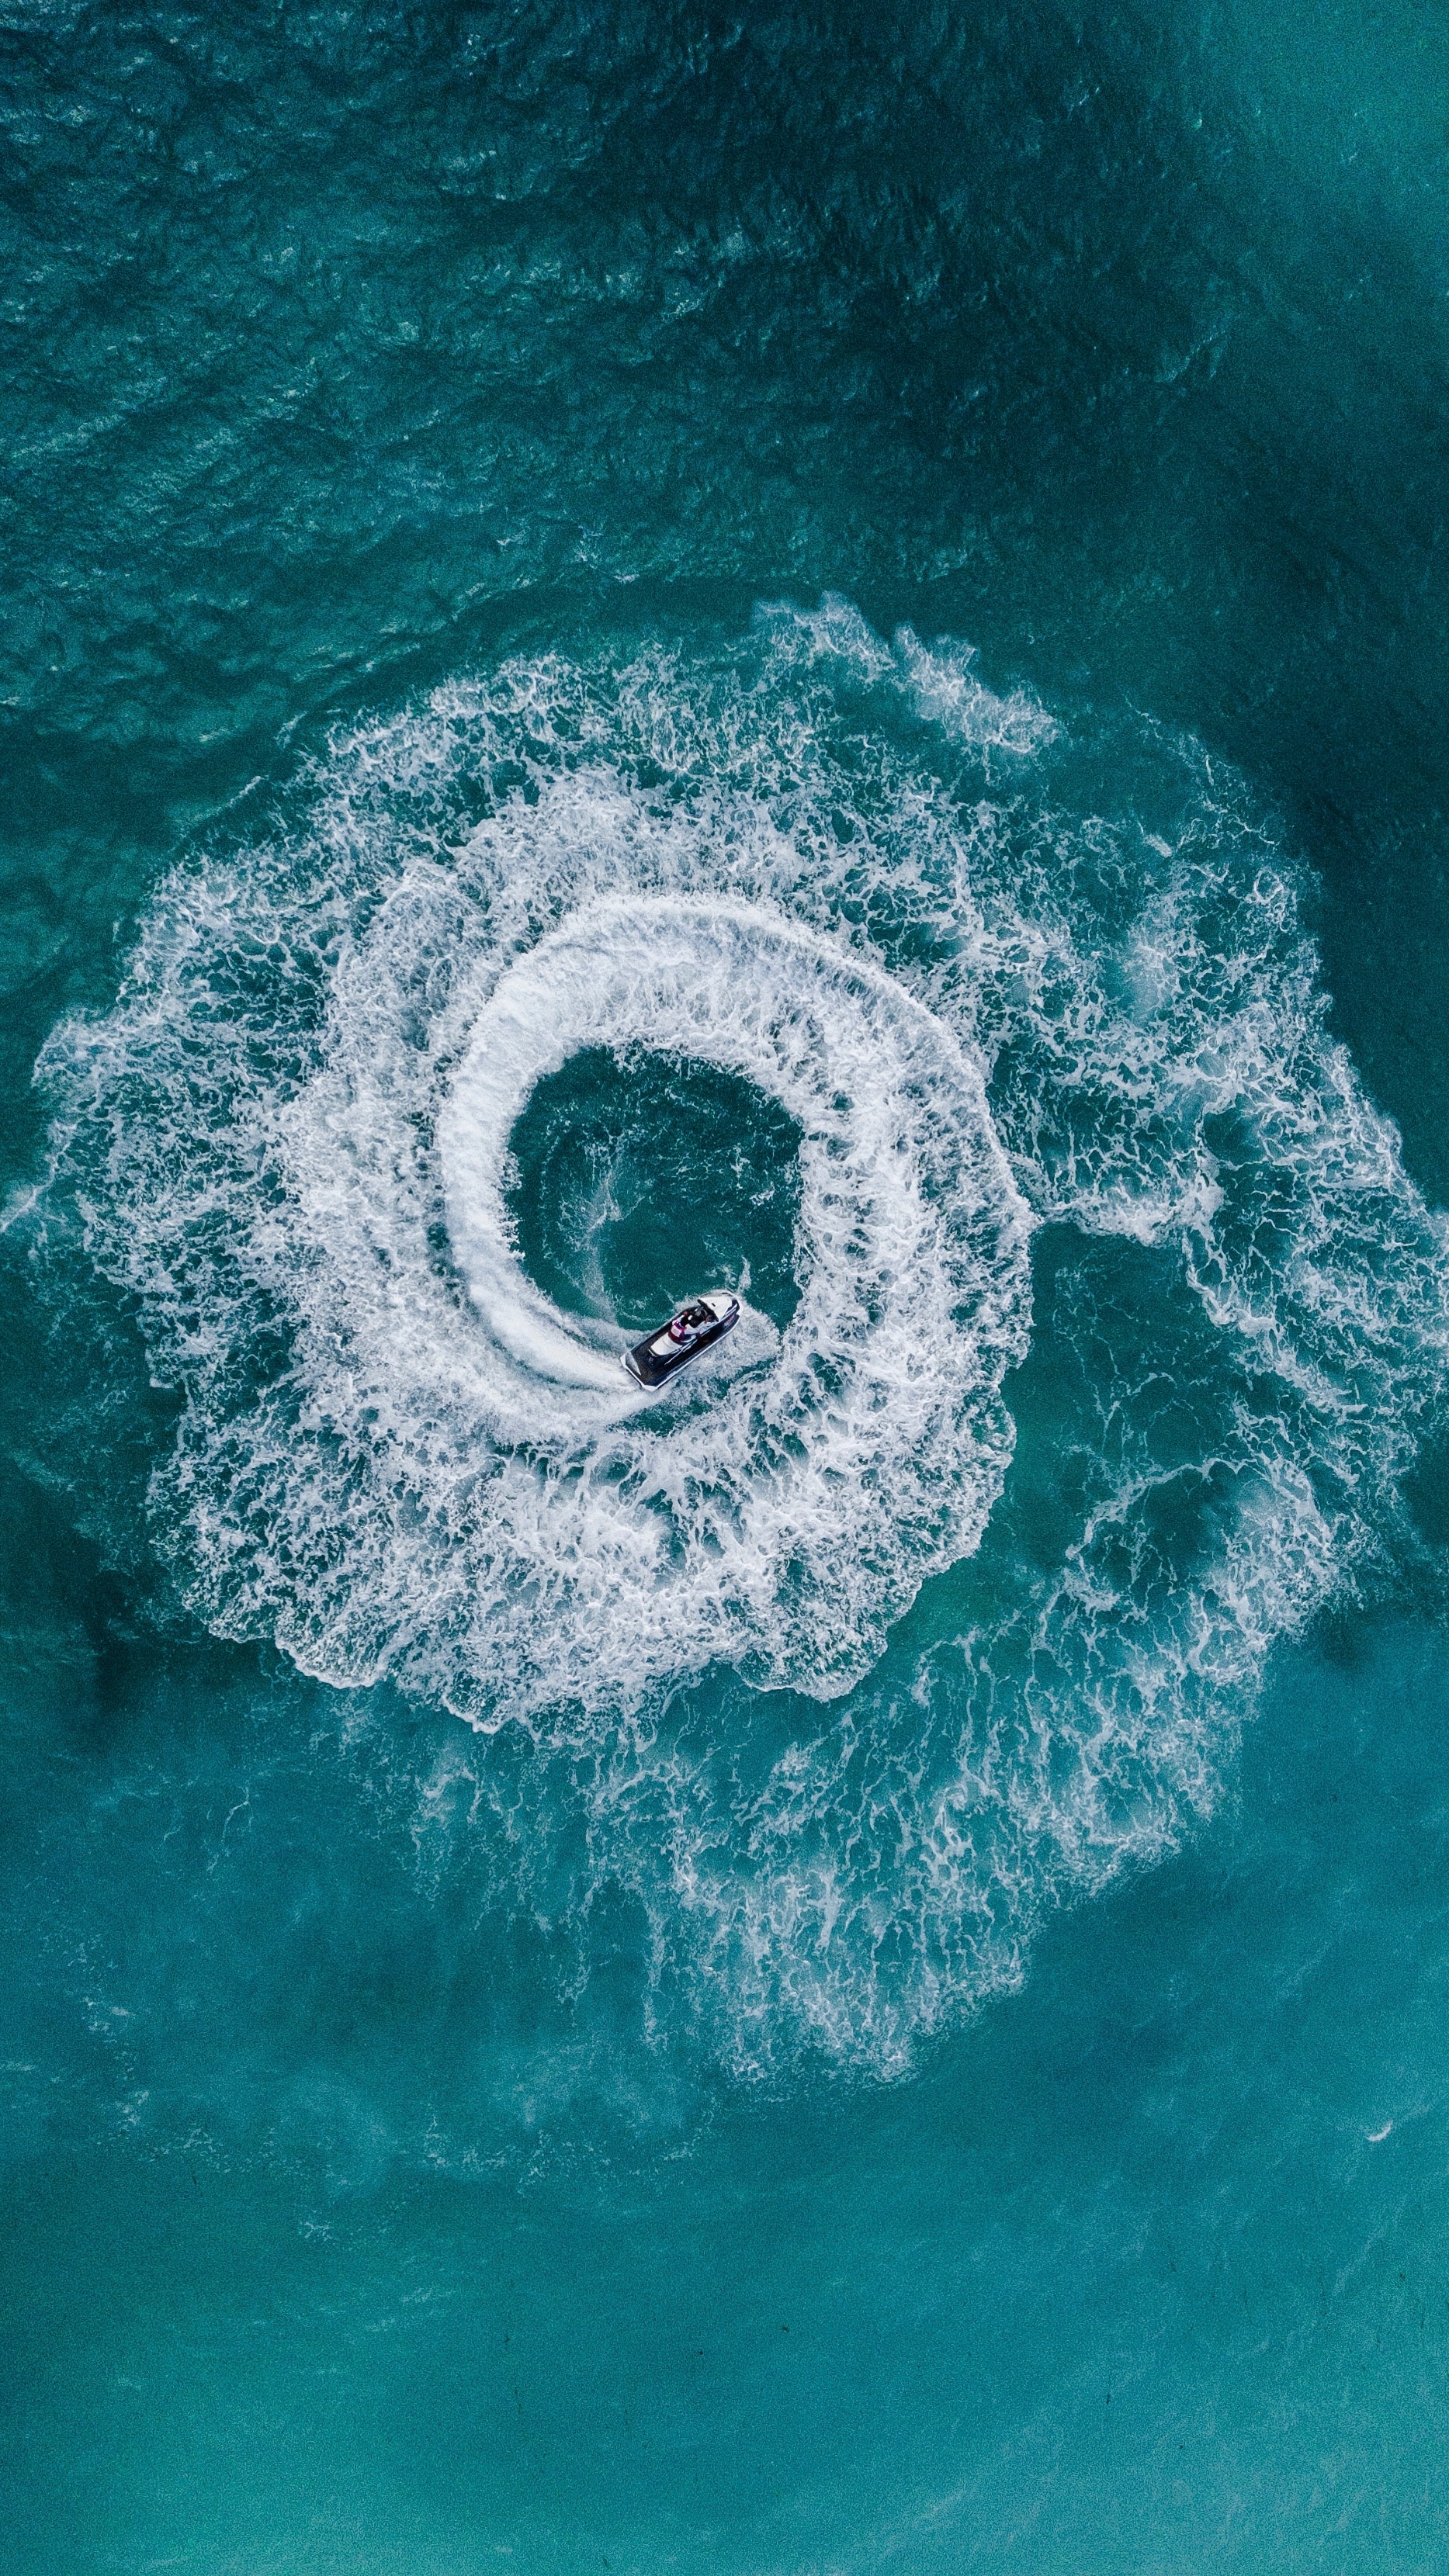 android miscellaneous, water, sea, waves, view from above, miscellanea, jet ski, hydrocycle